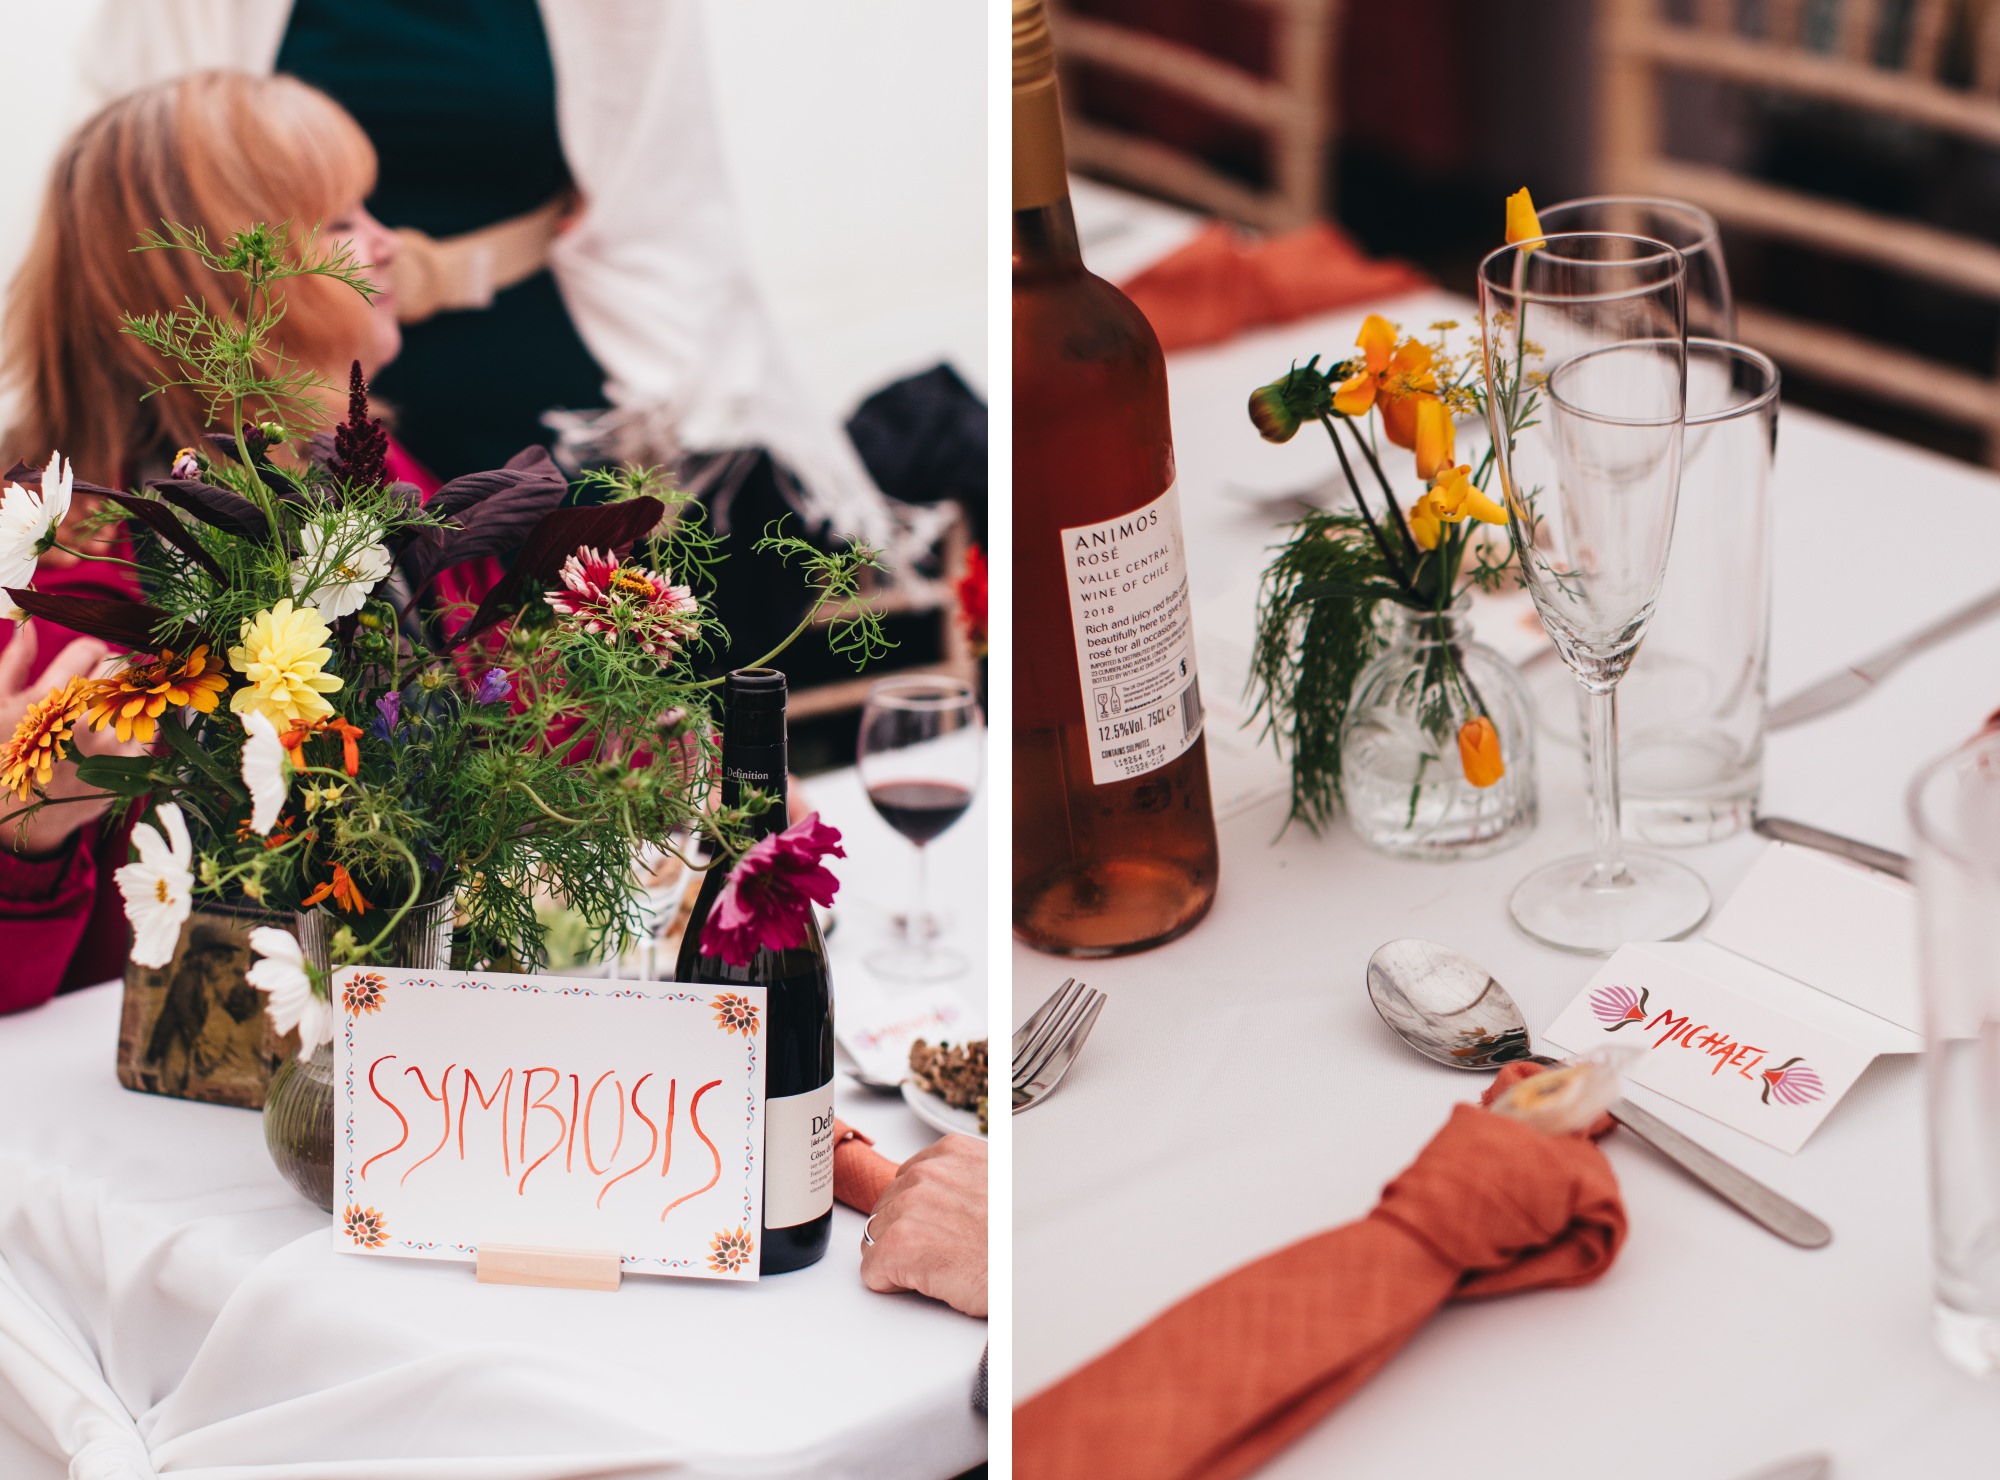 festival wedding table decorations, place names